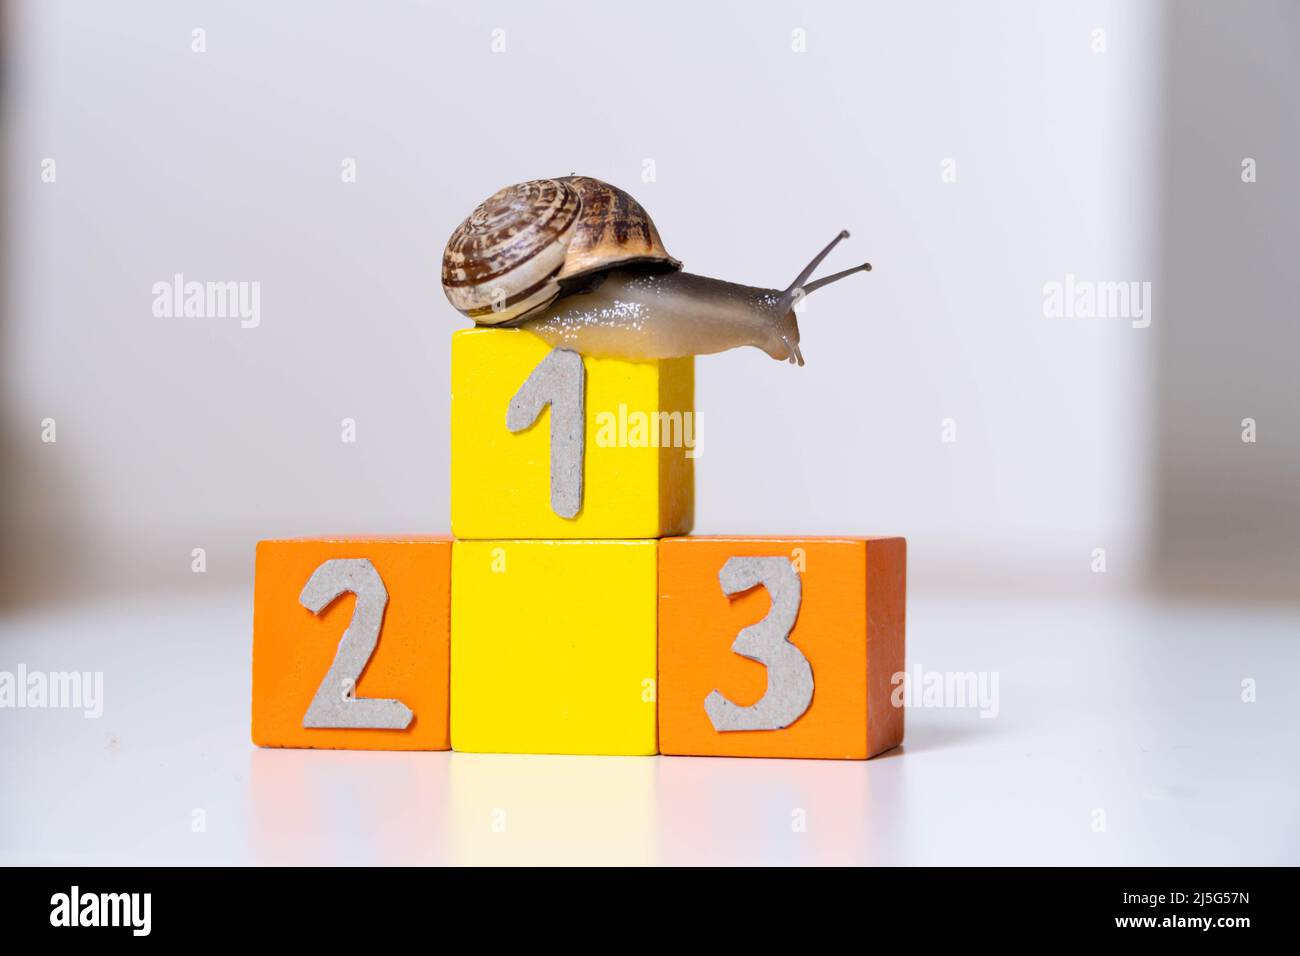 Snail in the first place of an Olympic podium. concept of success and everything is possible with effort Stock Photo